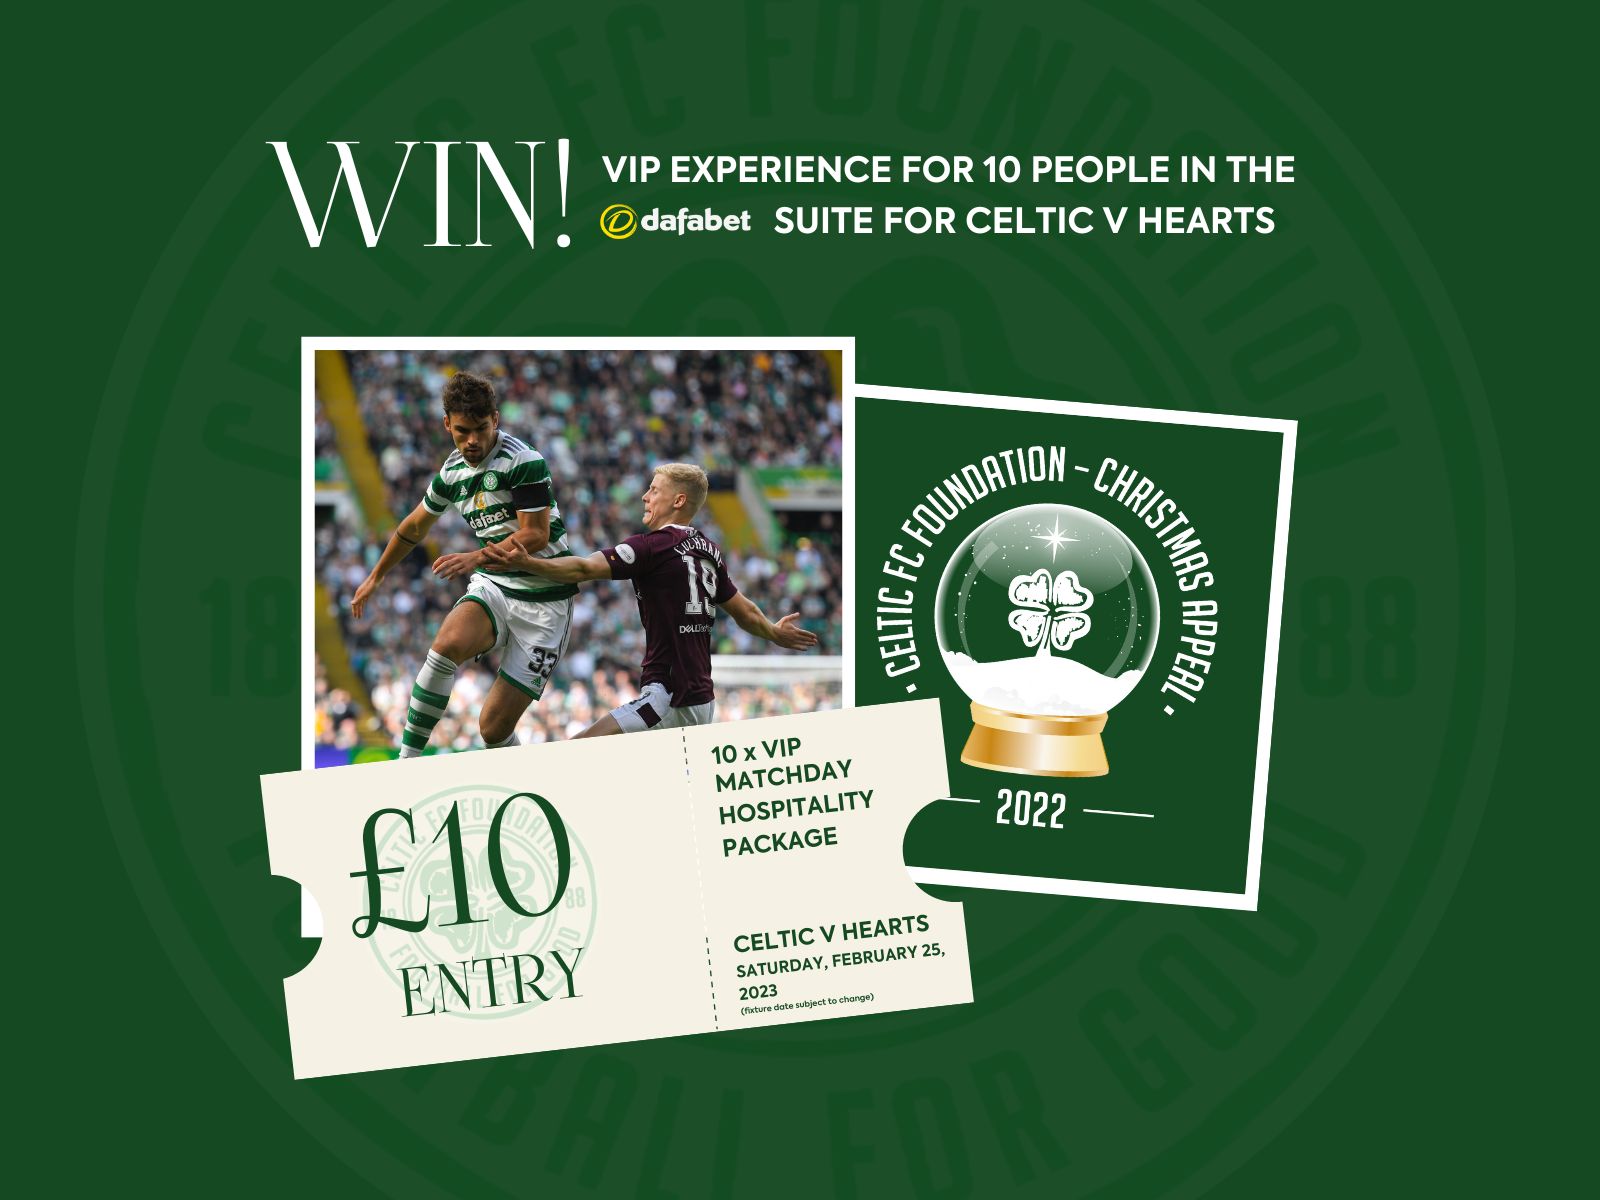 Win a VIP experience for 10 people in the Dafabet Suite for Celtic v Hearts Celtic FC Foundation charity.celticfc